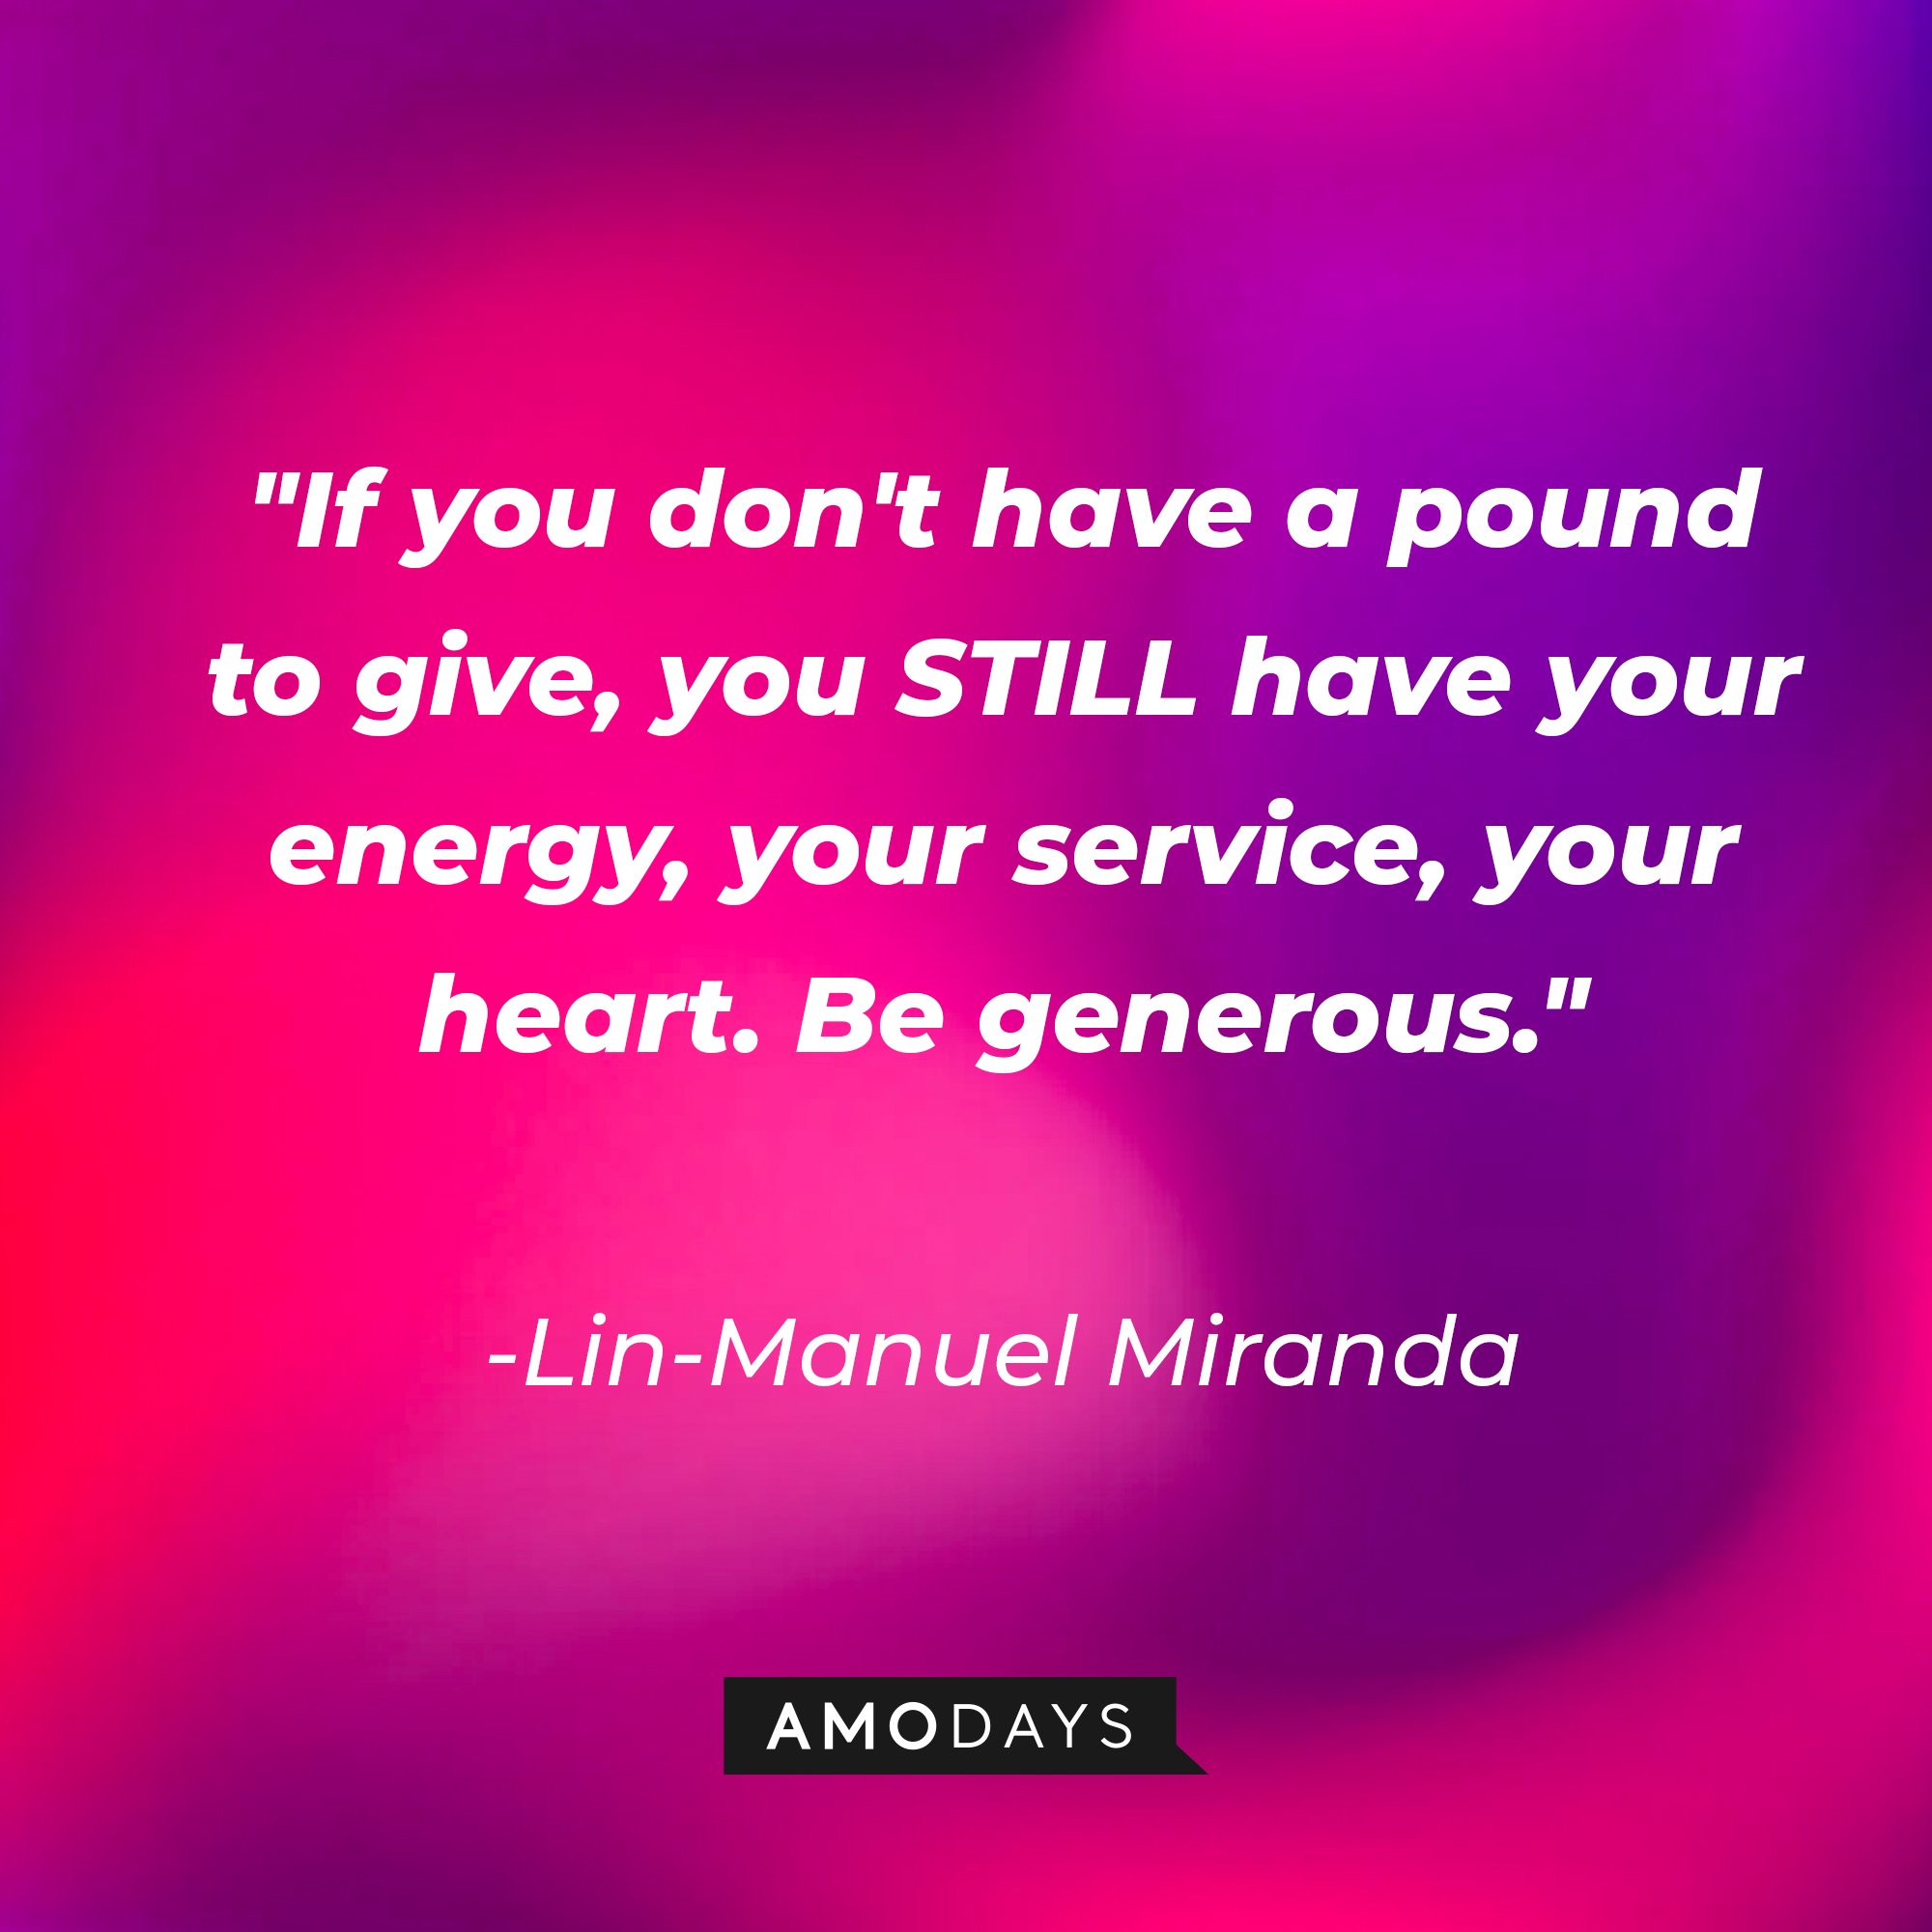 Lin-Manuel Miranda's quote: "If you don't have a pound to give, you STILL have your energy, your service, your heart. Be generous." | Image: AmoDays